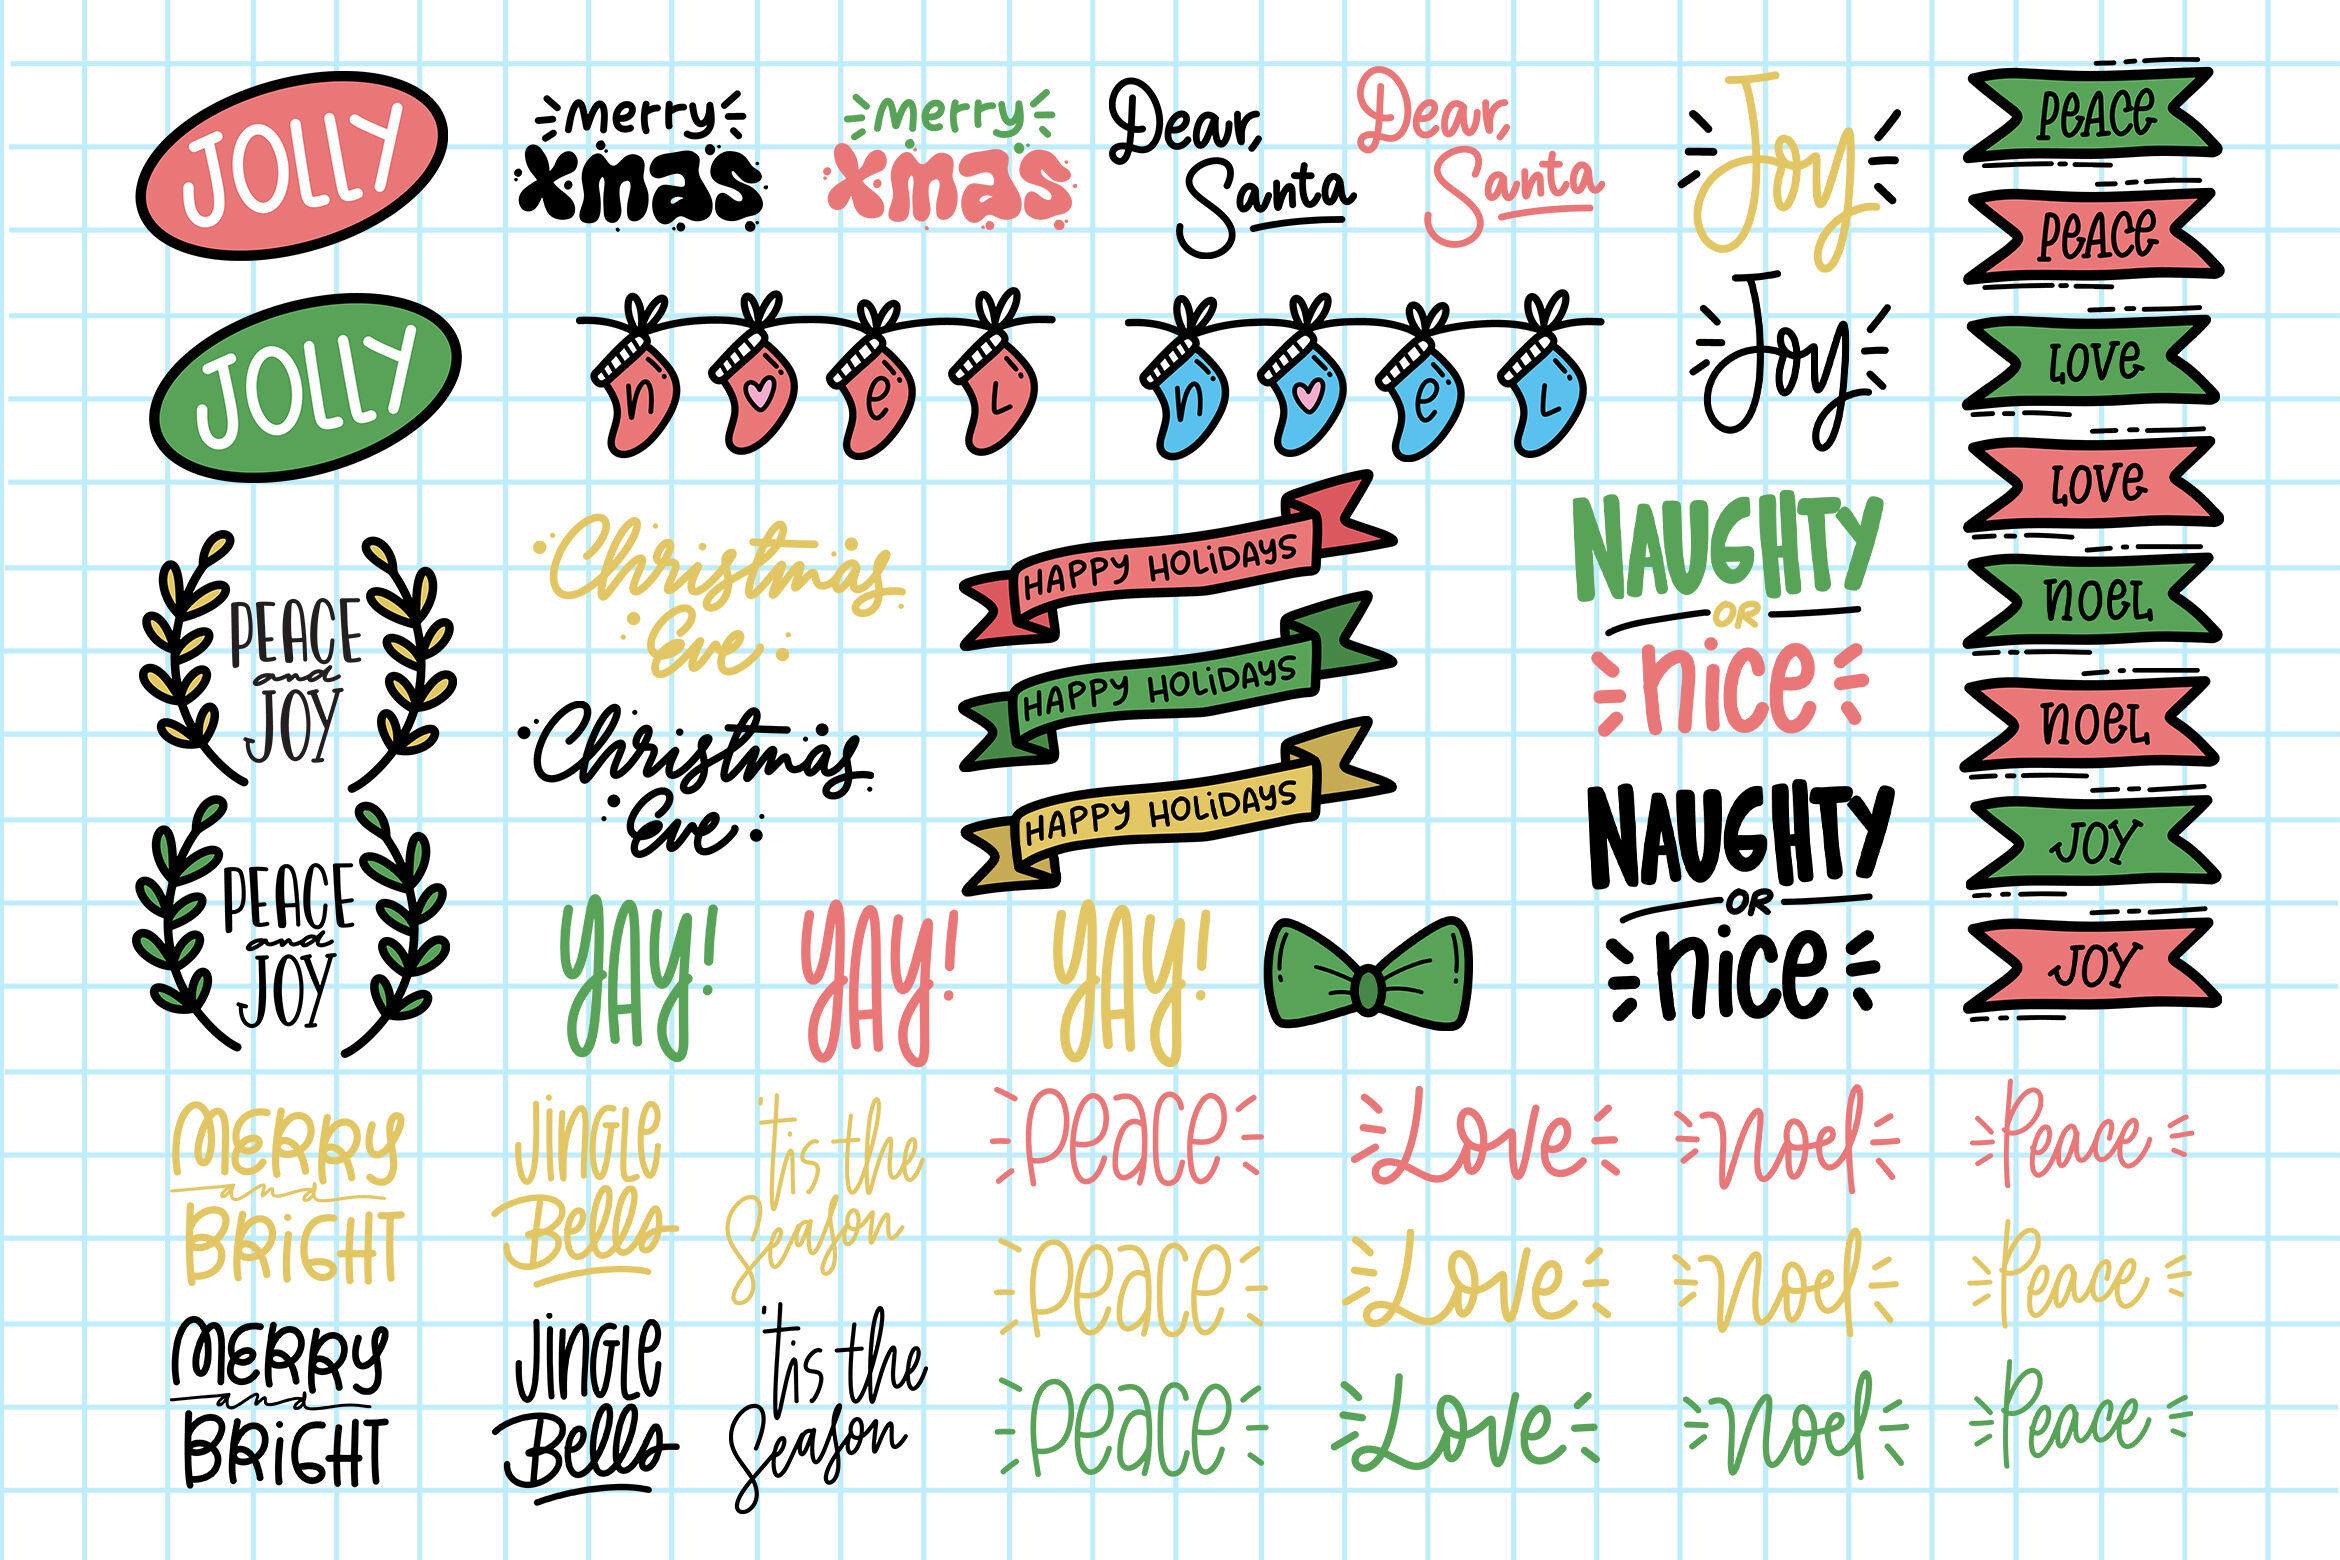 The Christmas Sticker Pack (Christmas Stickers, Xmas Stickers) By